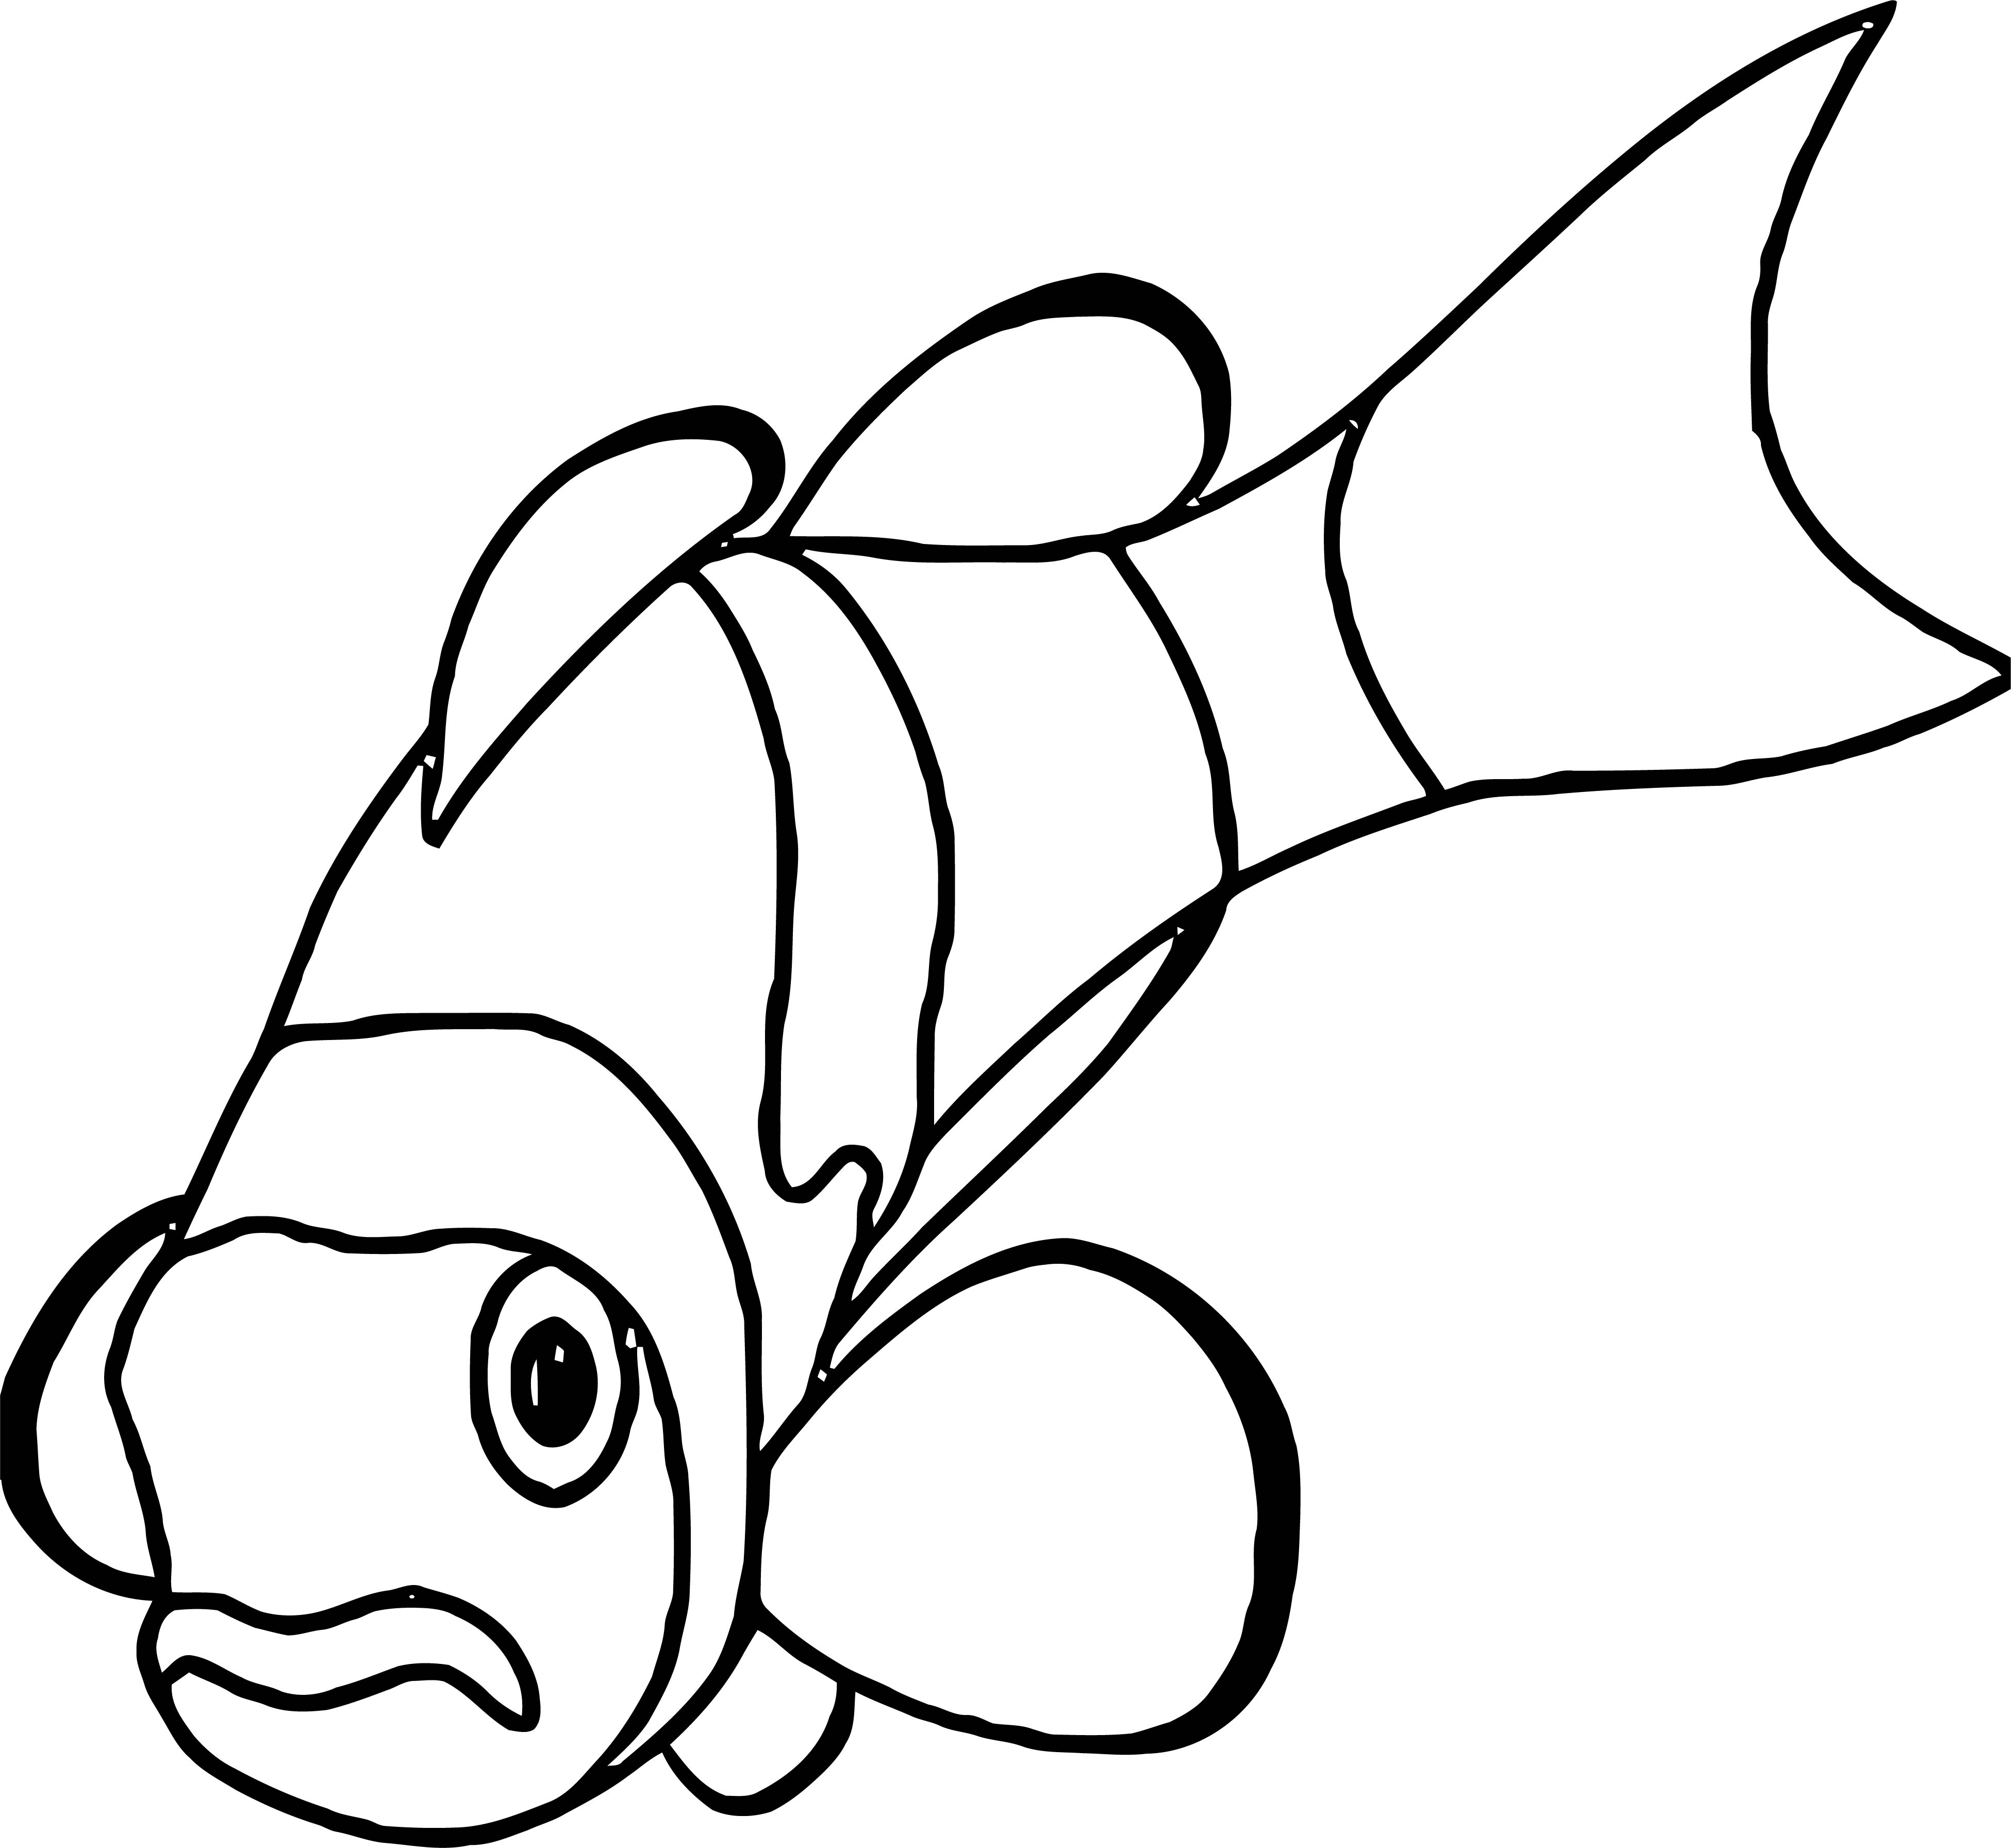 Fish Coloring Page Wecoloringpage 055